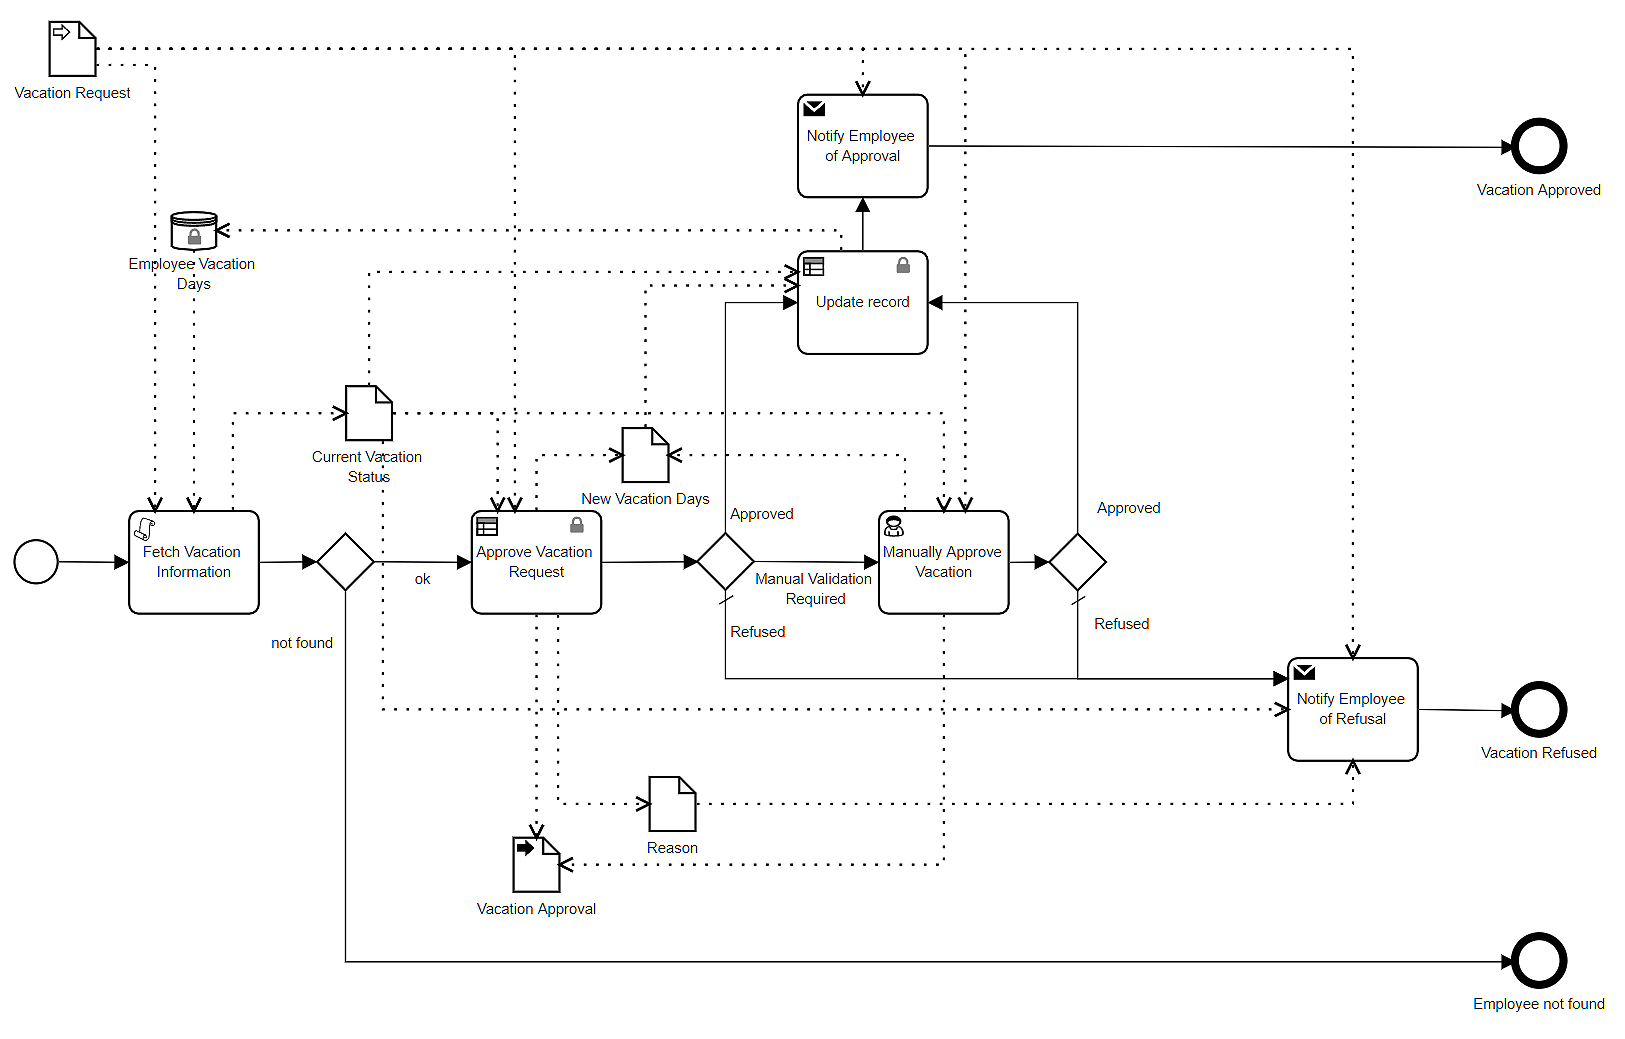 Bruce Silver's blog - A Methodology for Low-Code Business Automation with BPMN and DMN